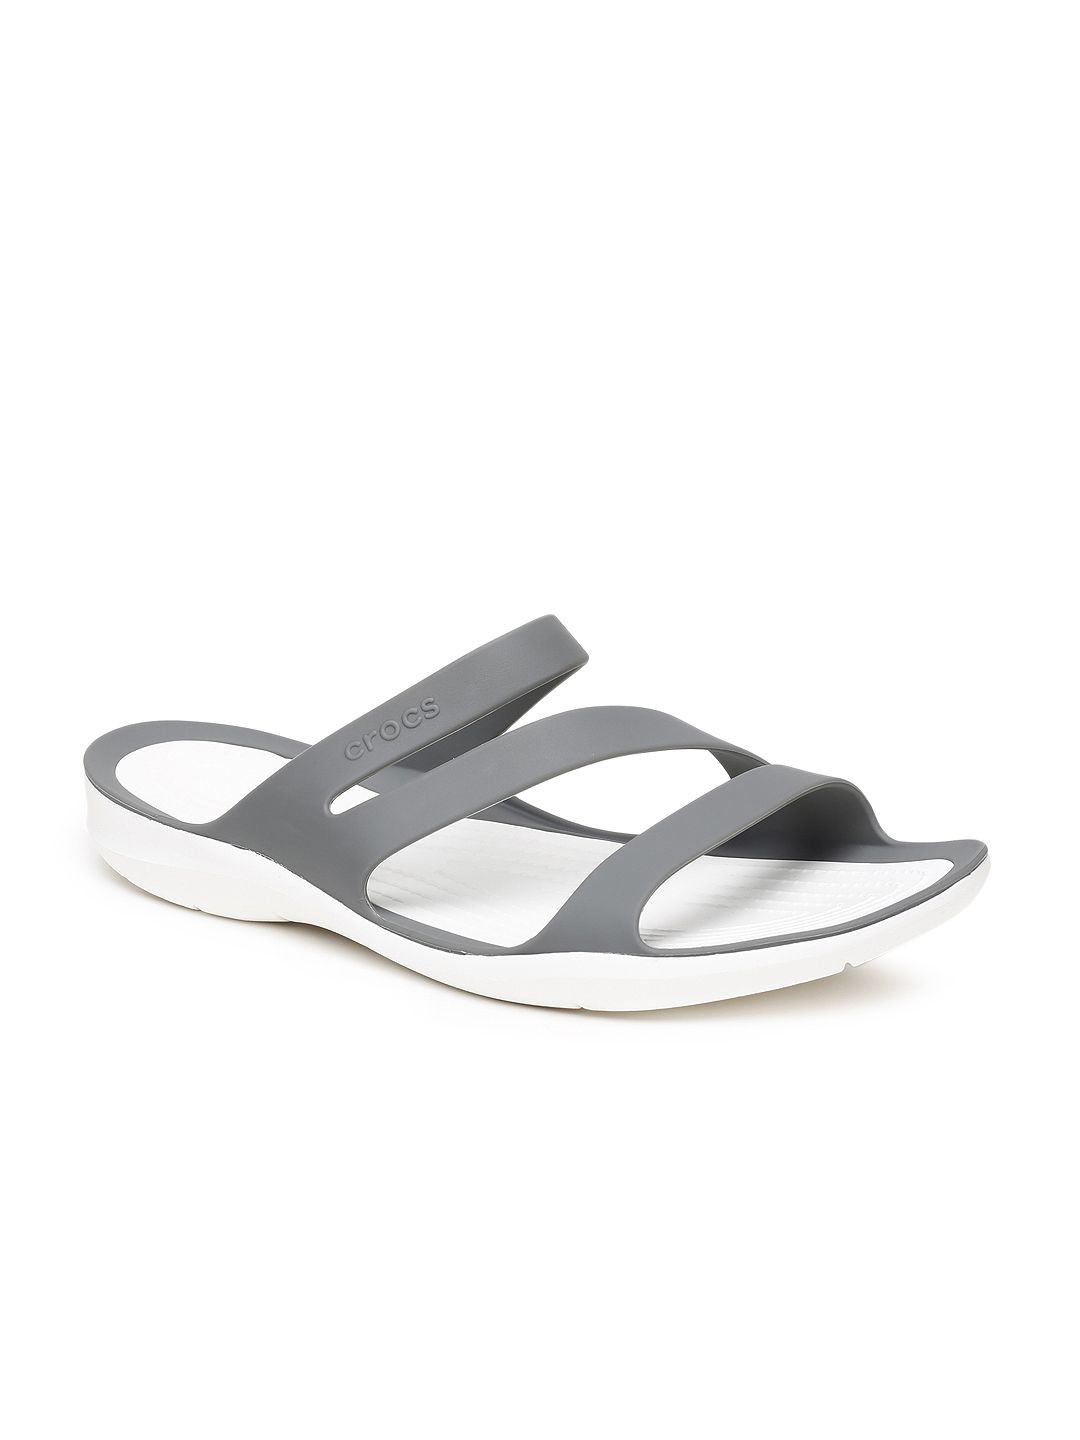 Crocs Women Grey Solid Synthetic Open Toe Flats Price in India